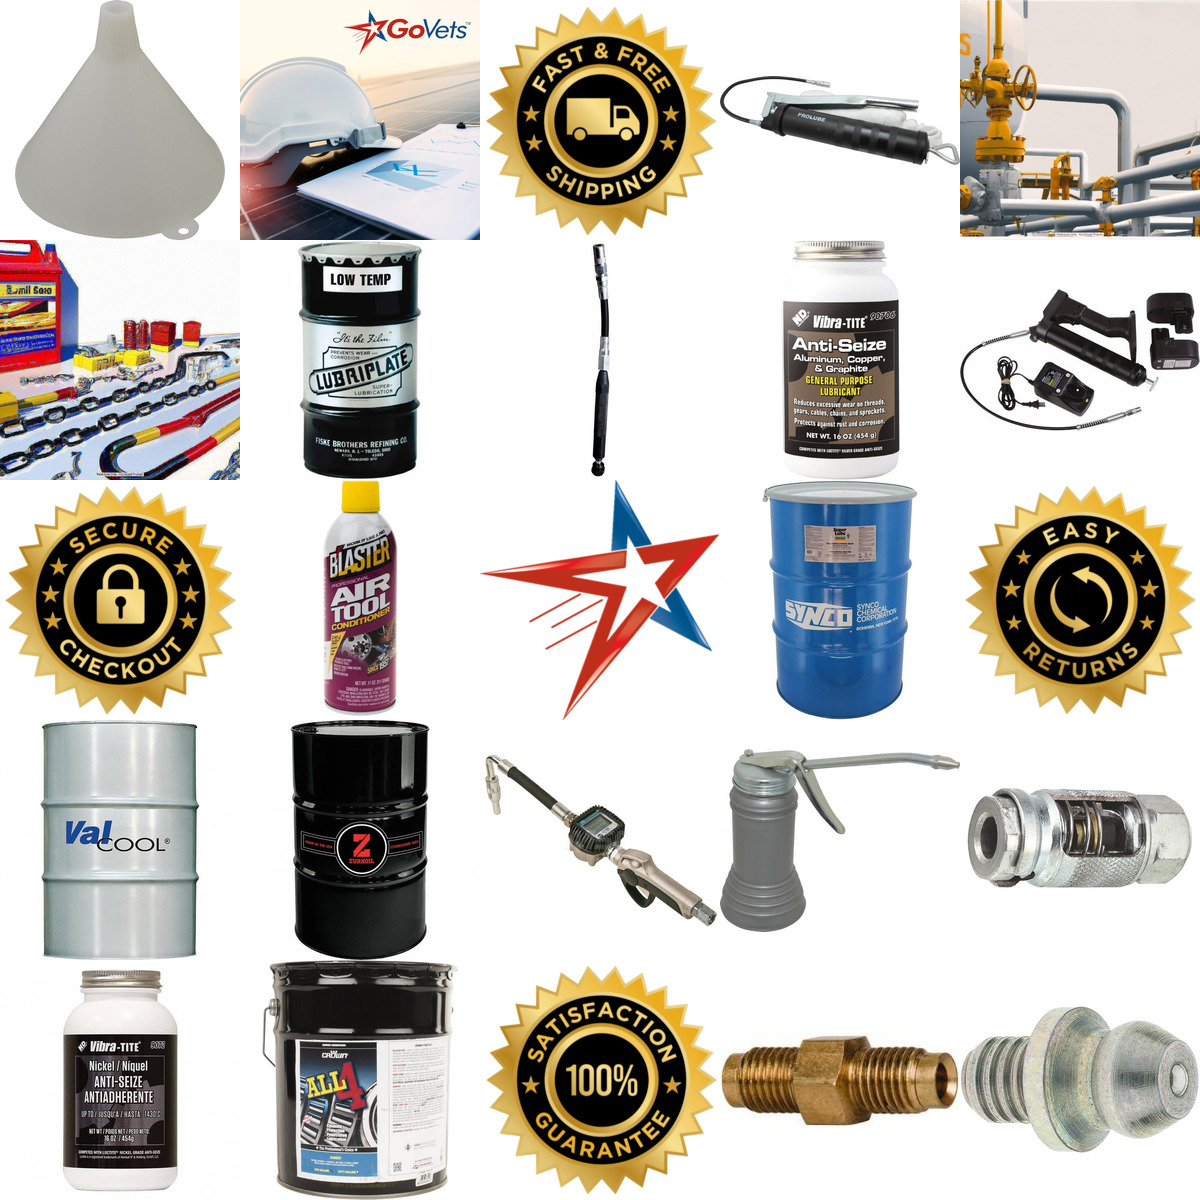 A selection of Lubricants and Lubrication Equipment products on GoVets